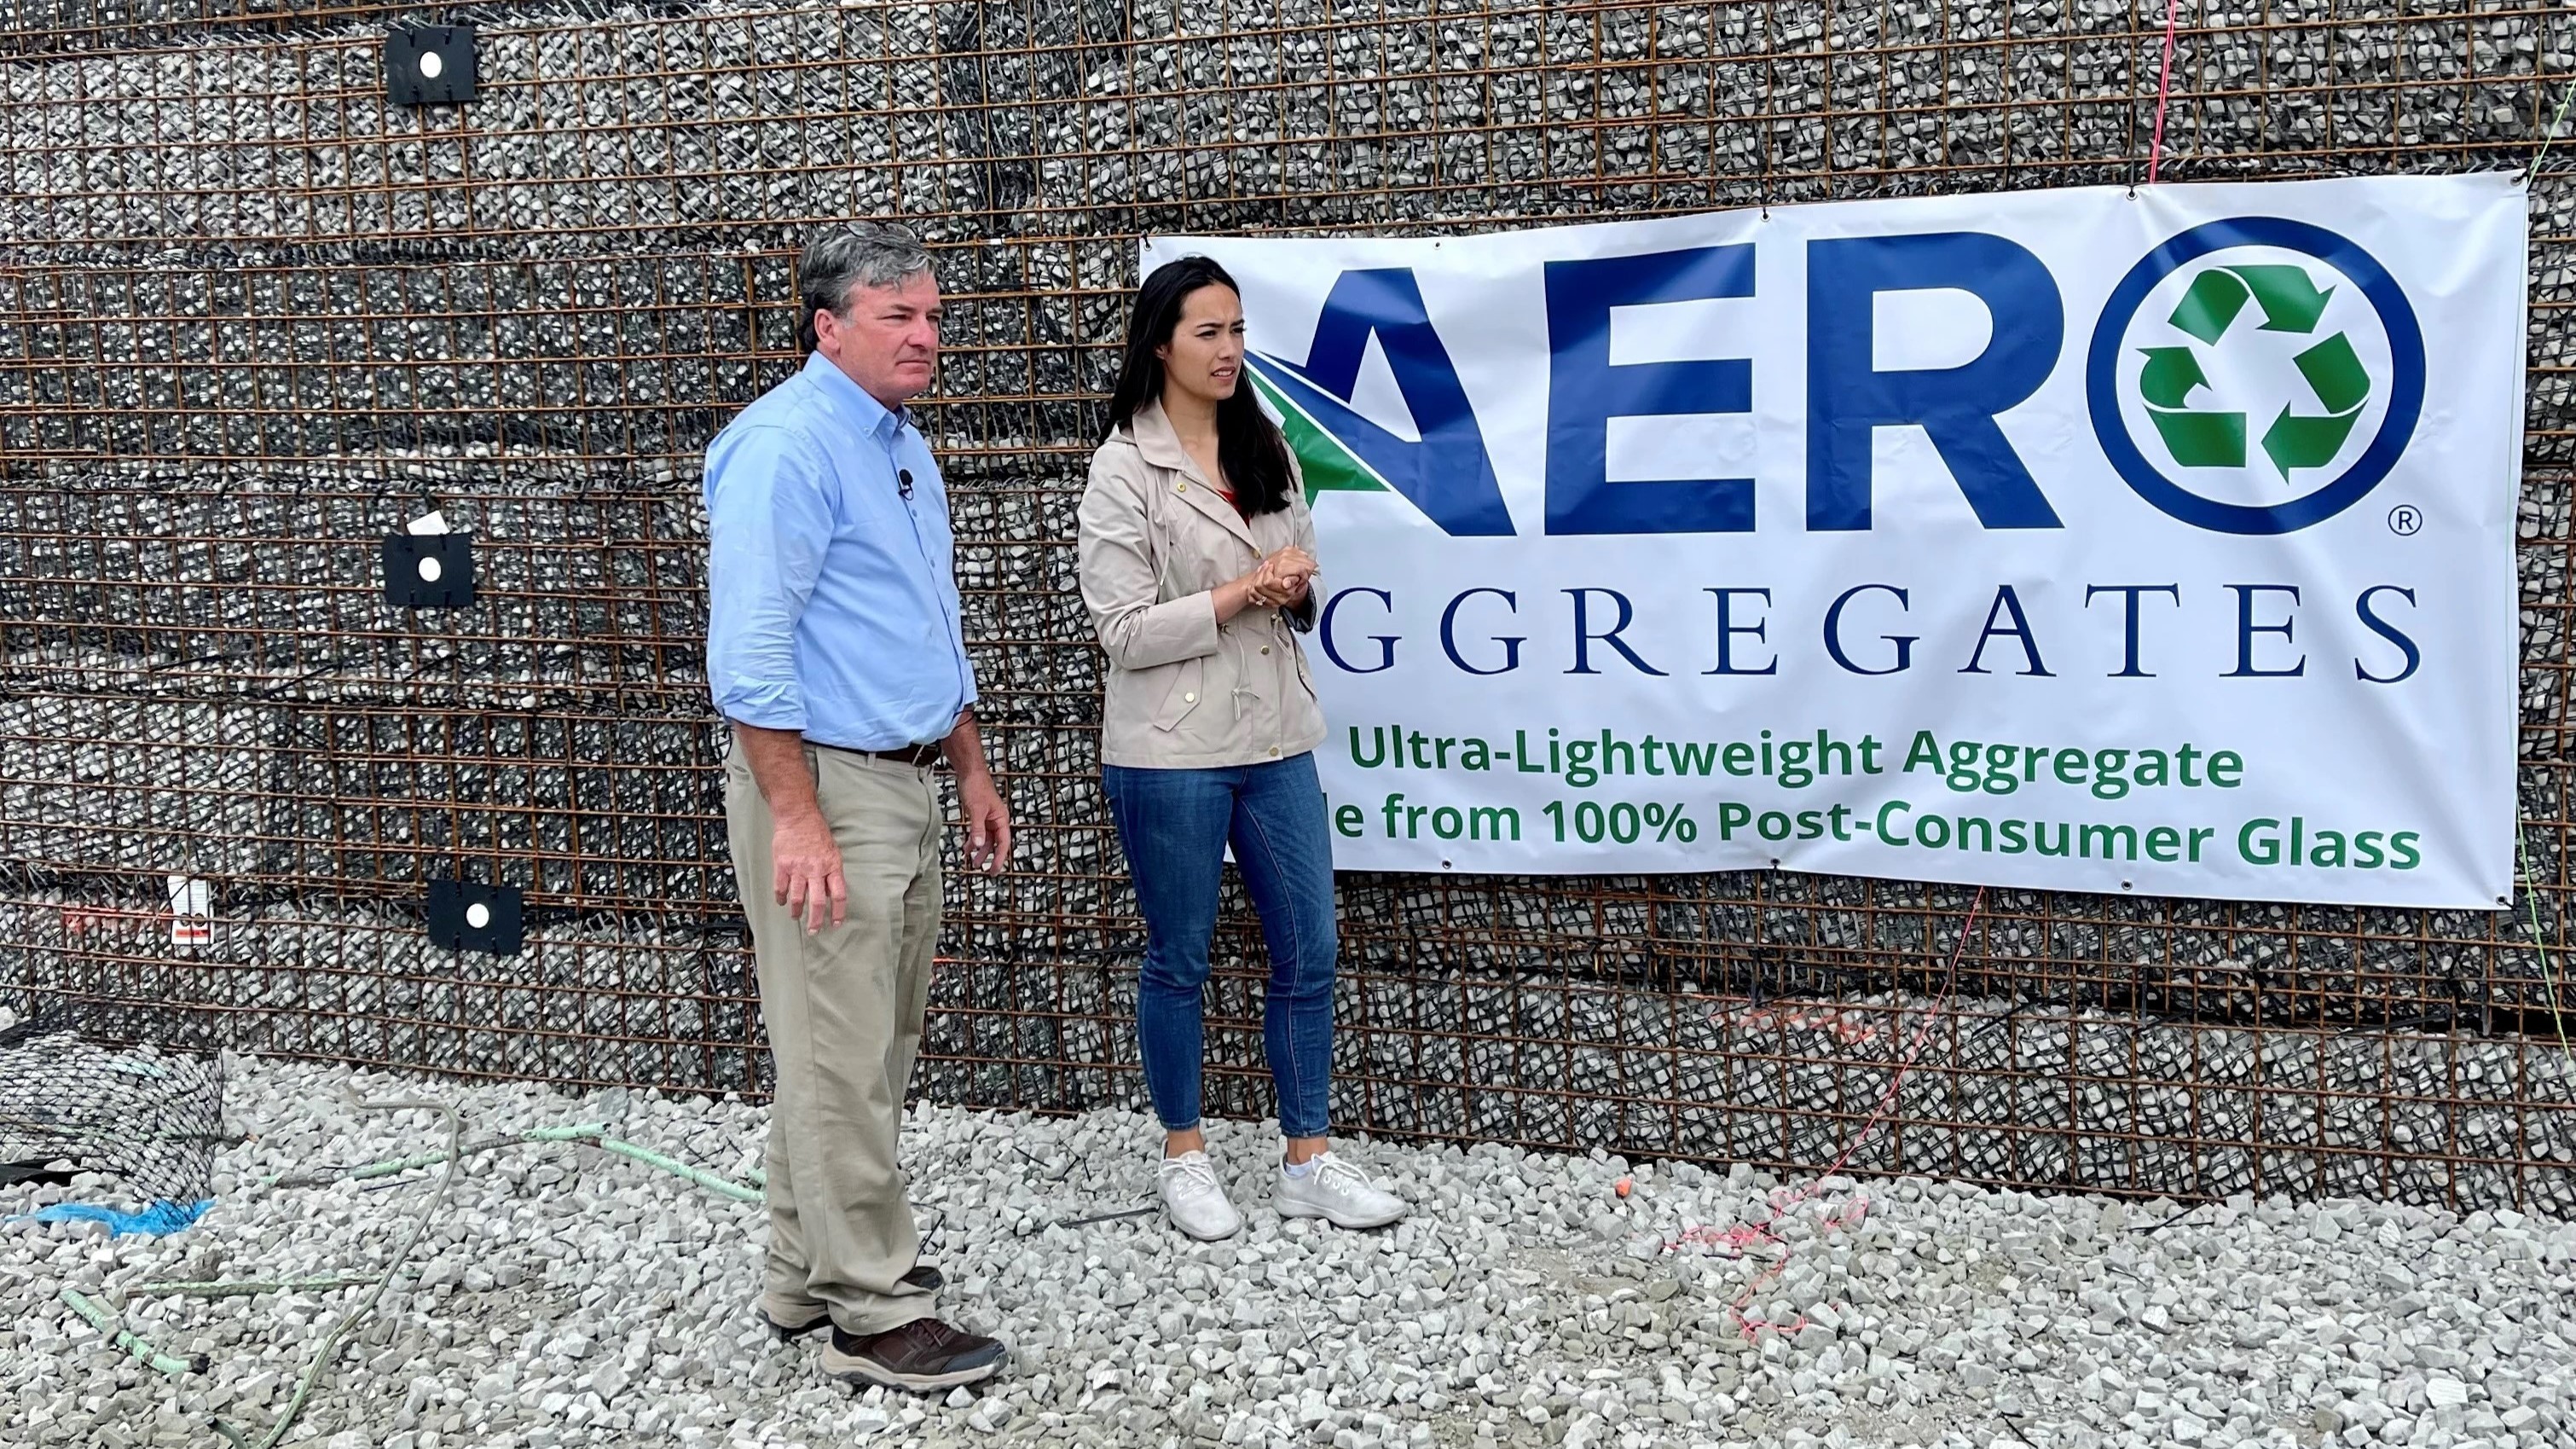 PennDOT Secretary Michael Carroll and NBC Today Show Reporter Emilie Ikeda stand in front of the temporary bridge structure that was built using recycled glass aggregate with an Aero Aggregates banner hanging on the structure behind them